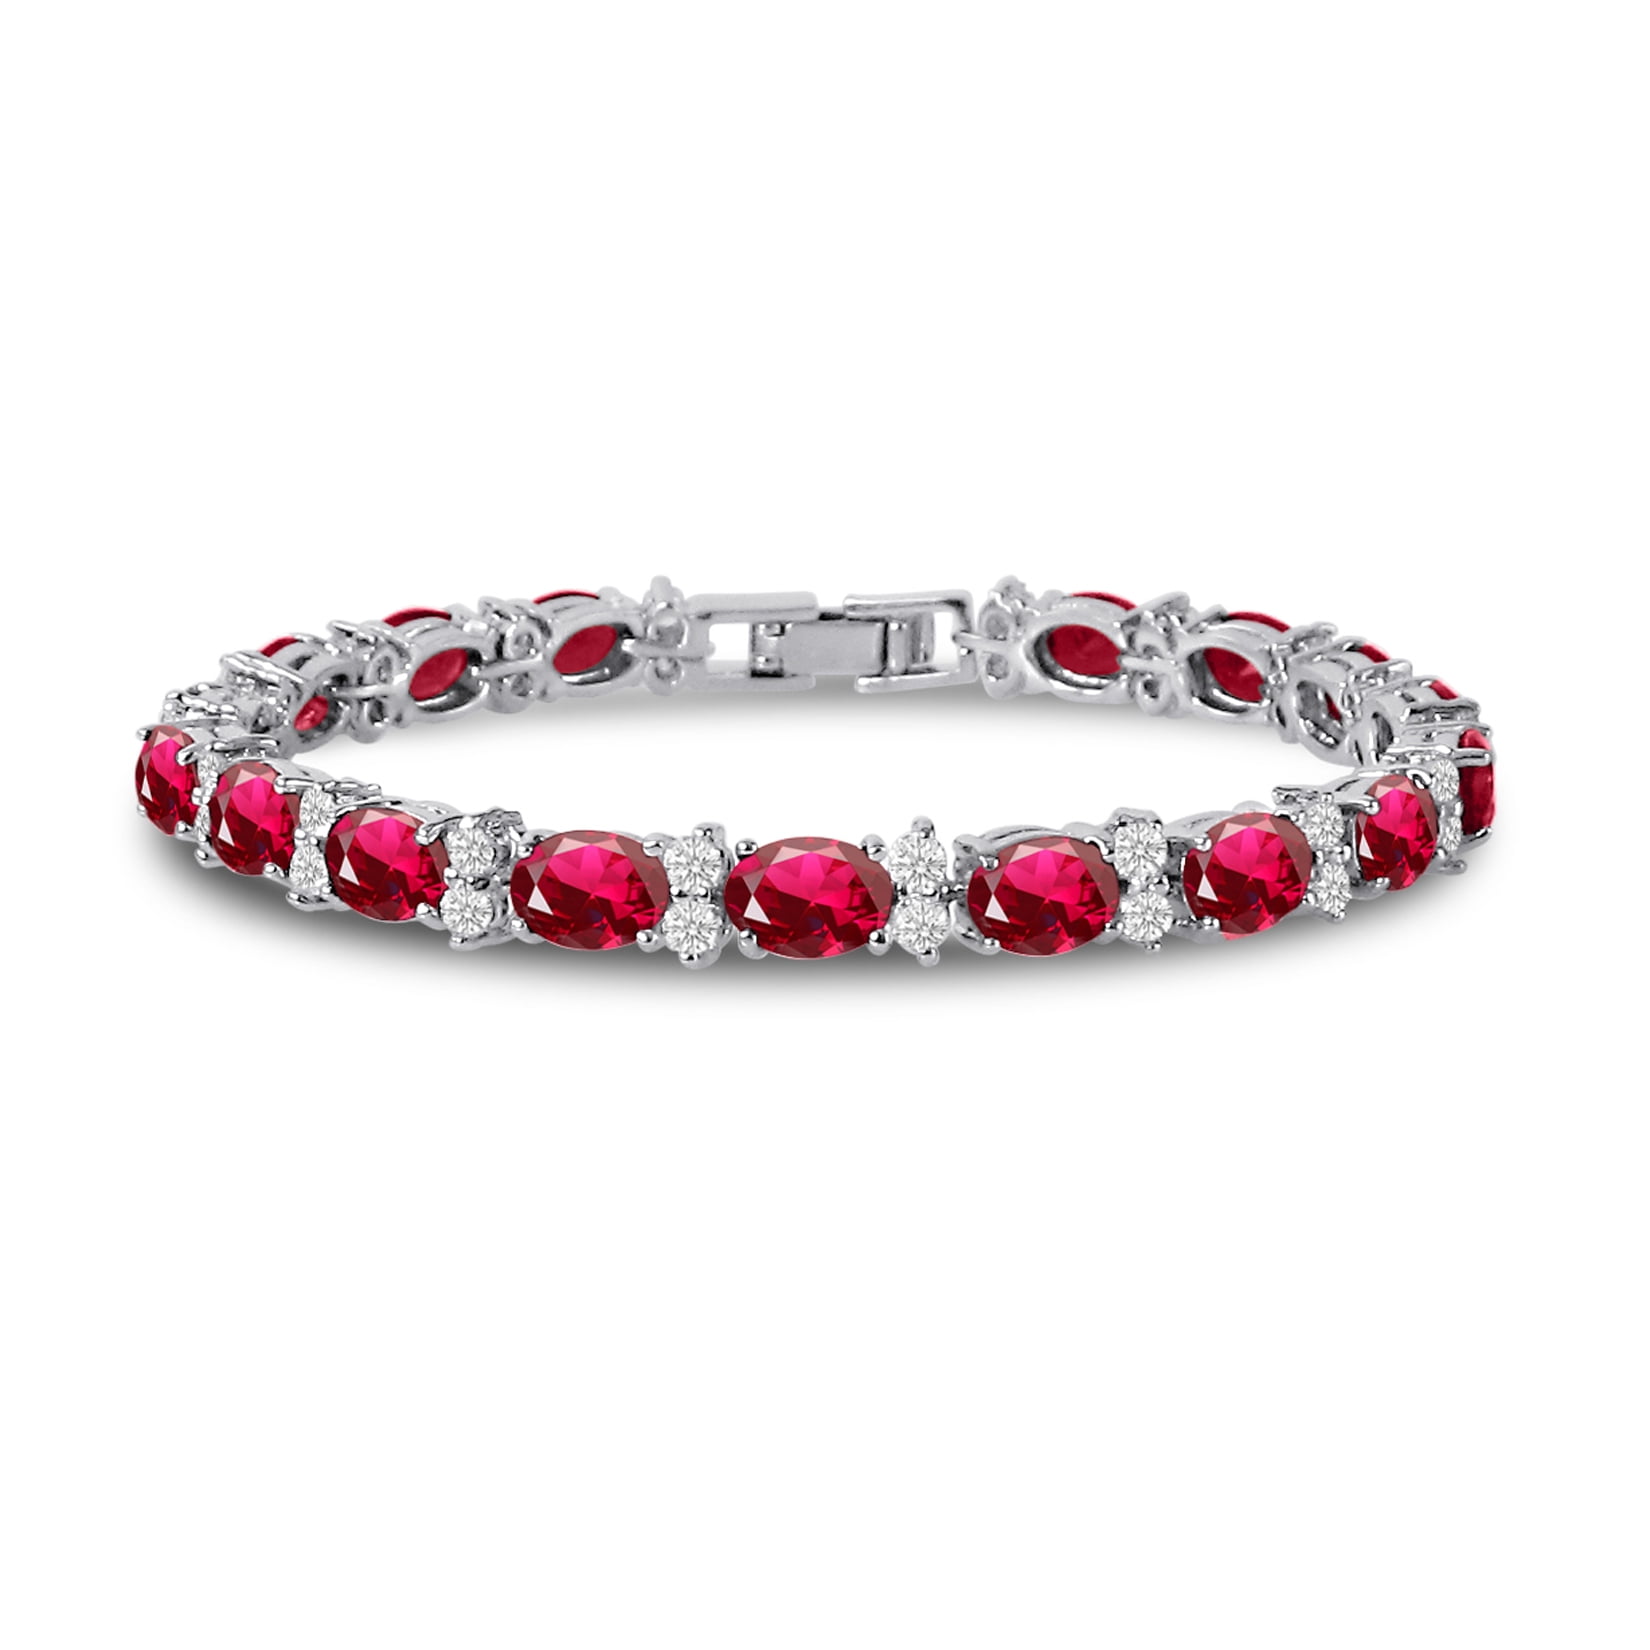 Conway Bracelet with Emerald cut Ruby | 1.08 carats Rectangle Ruby Chain in  14k White Gold | Diamondere